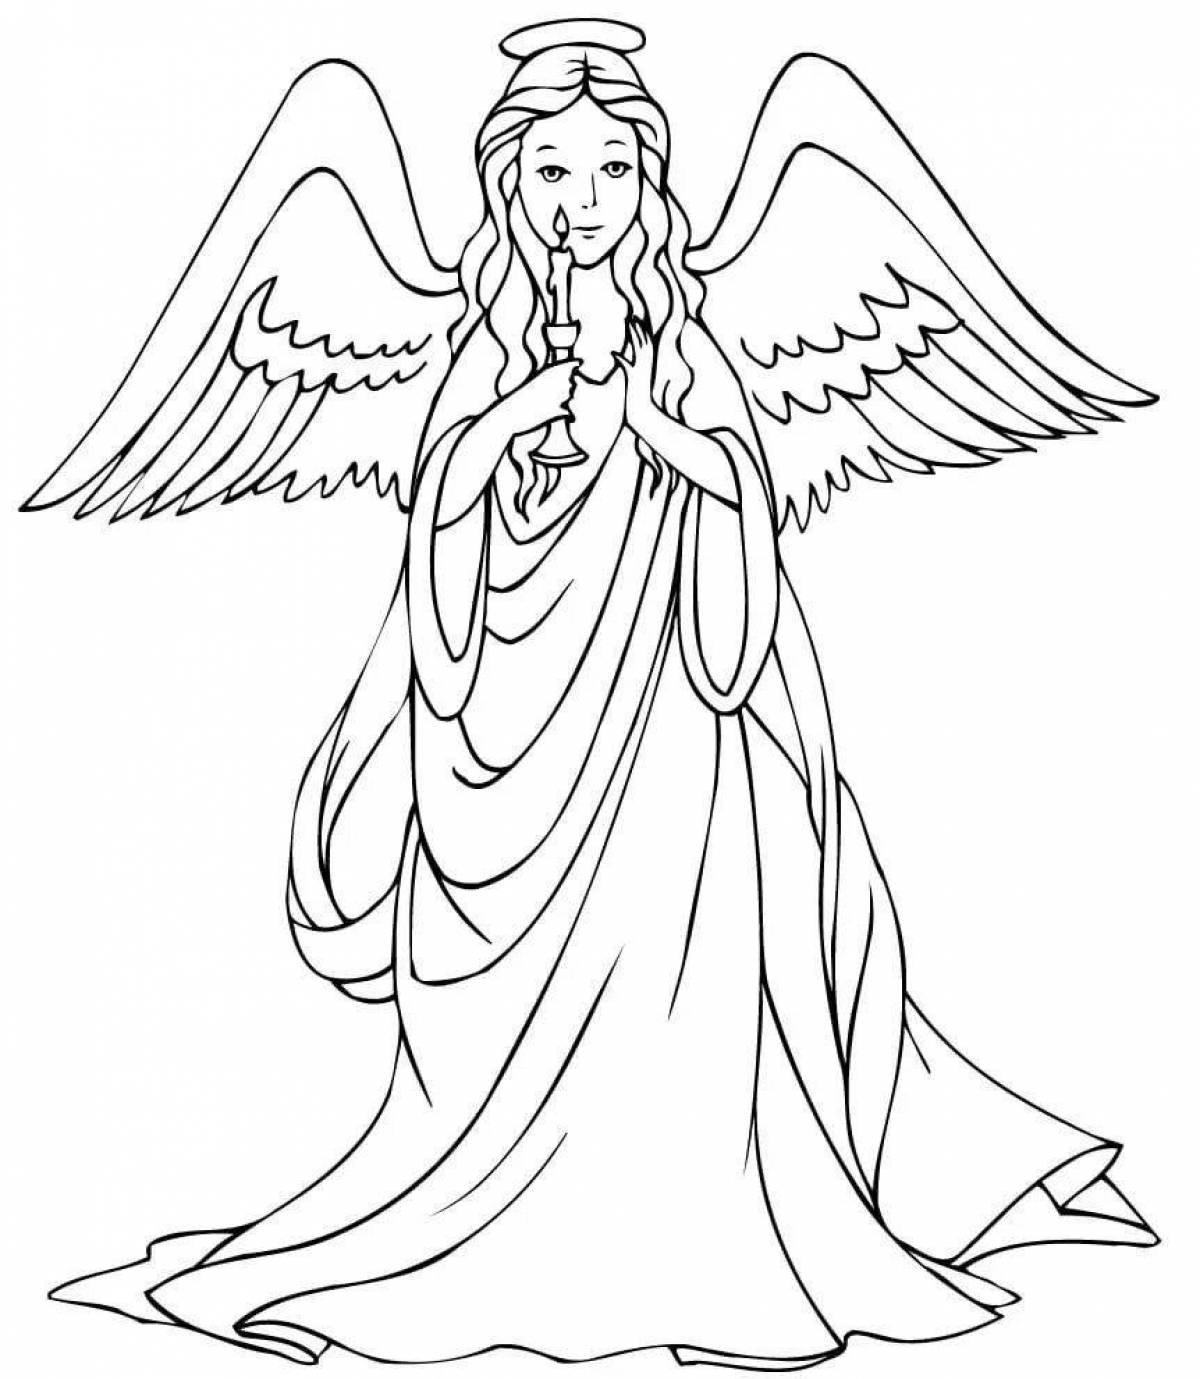 Exquisite guardian angel coloring book